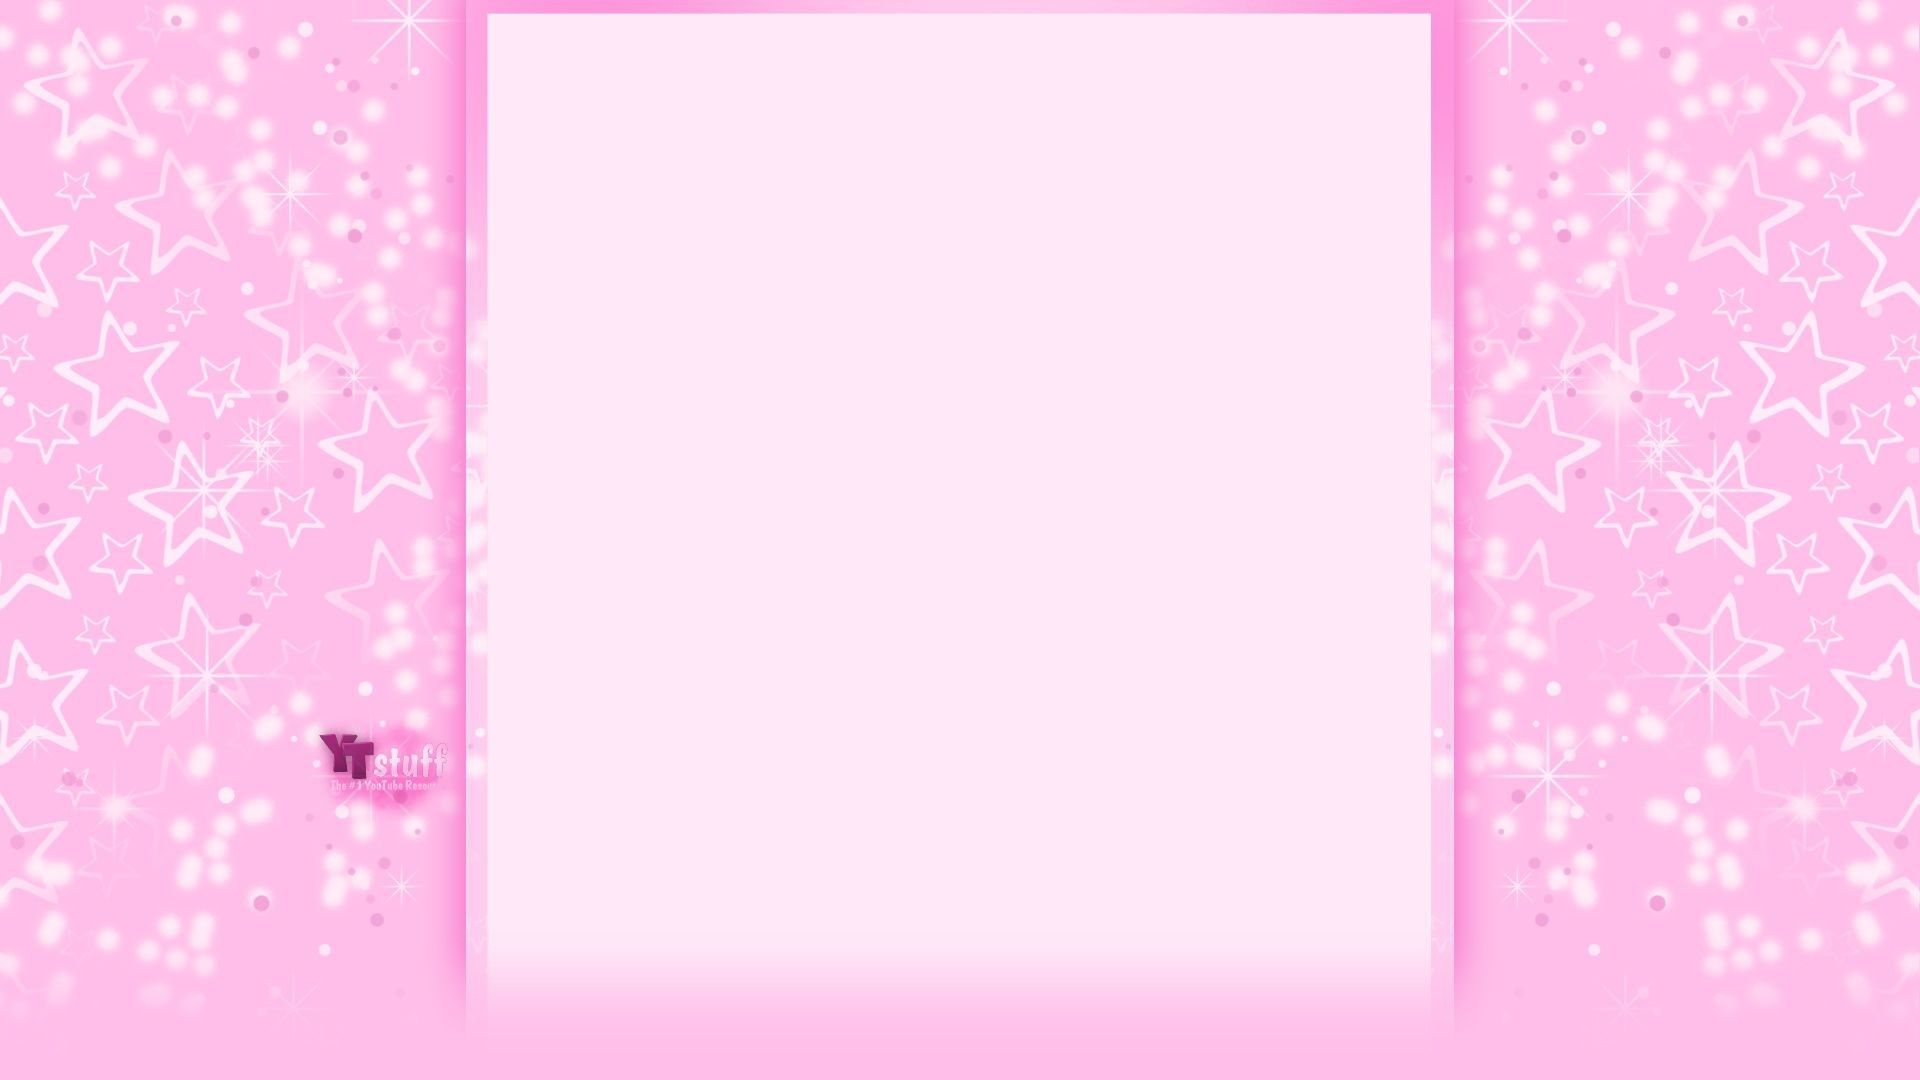 A pink background with stars and an empty frame - YouTube